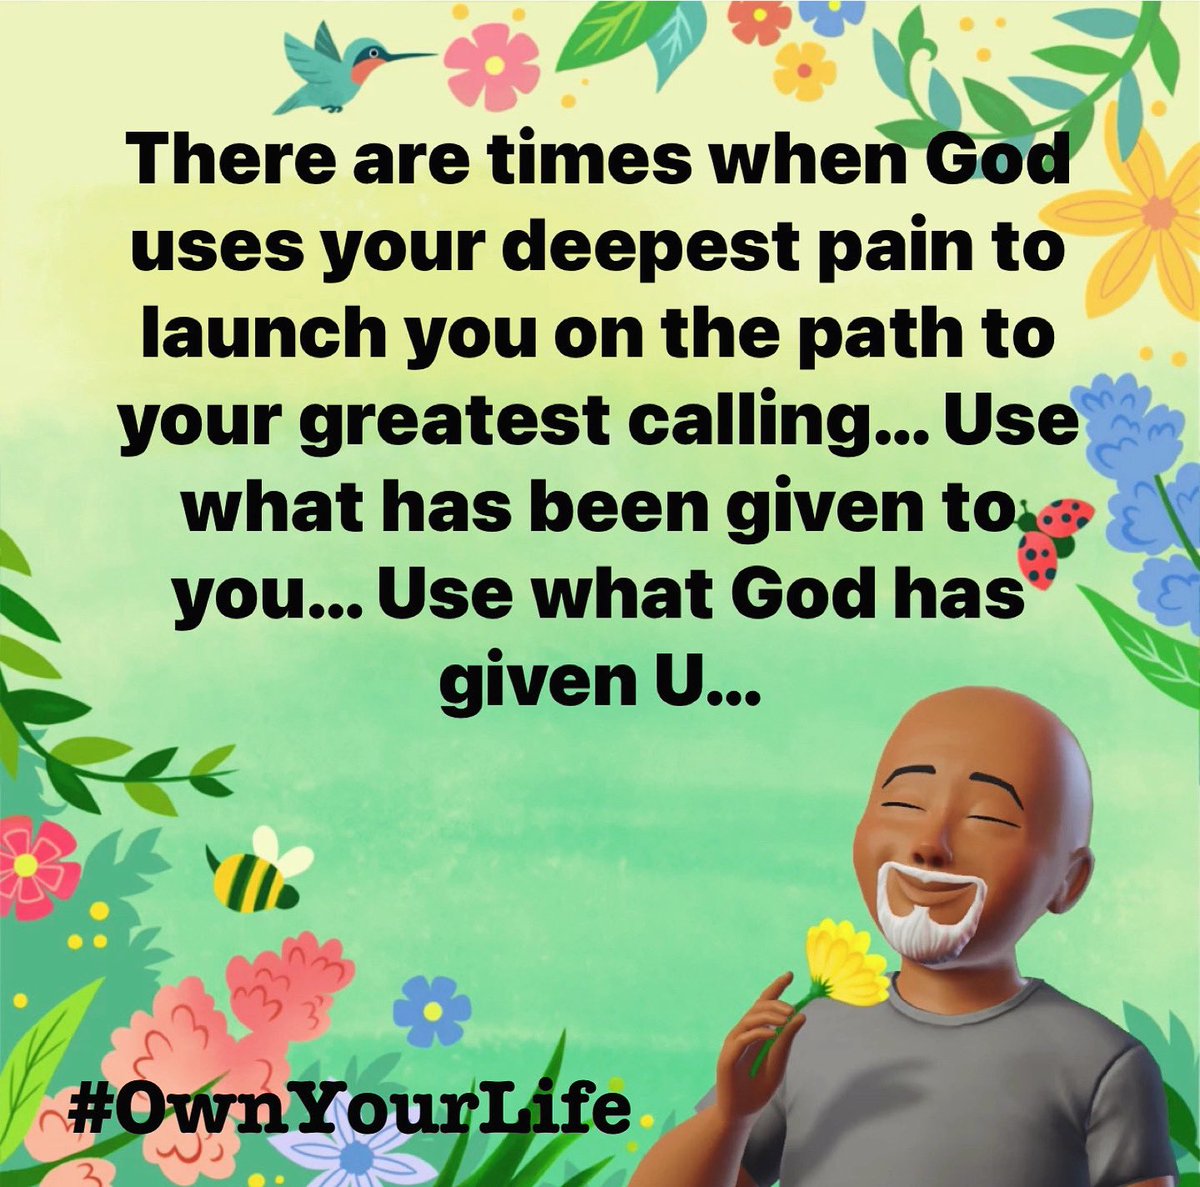 There are times when God uses your deepest pain to launch you on the path to your greatest calling… Use what has been given to you… Use what God has given U… 
#BeOfGoodCourage #Namaste #FightForYourDreams #WorkInProgress #EmbraceTheJourney #OwnYourLife #TheMarathonContinues